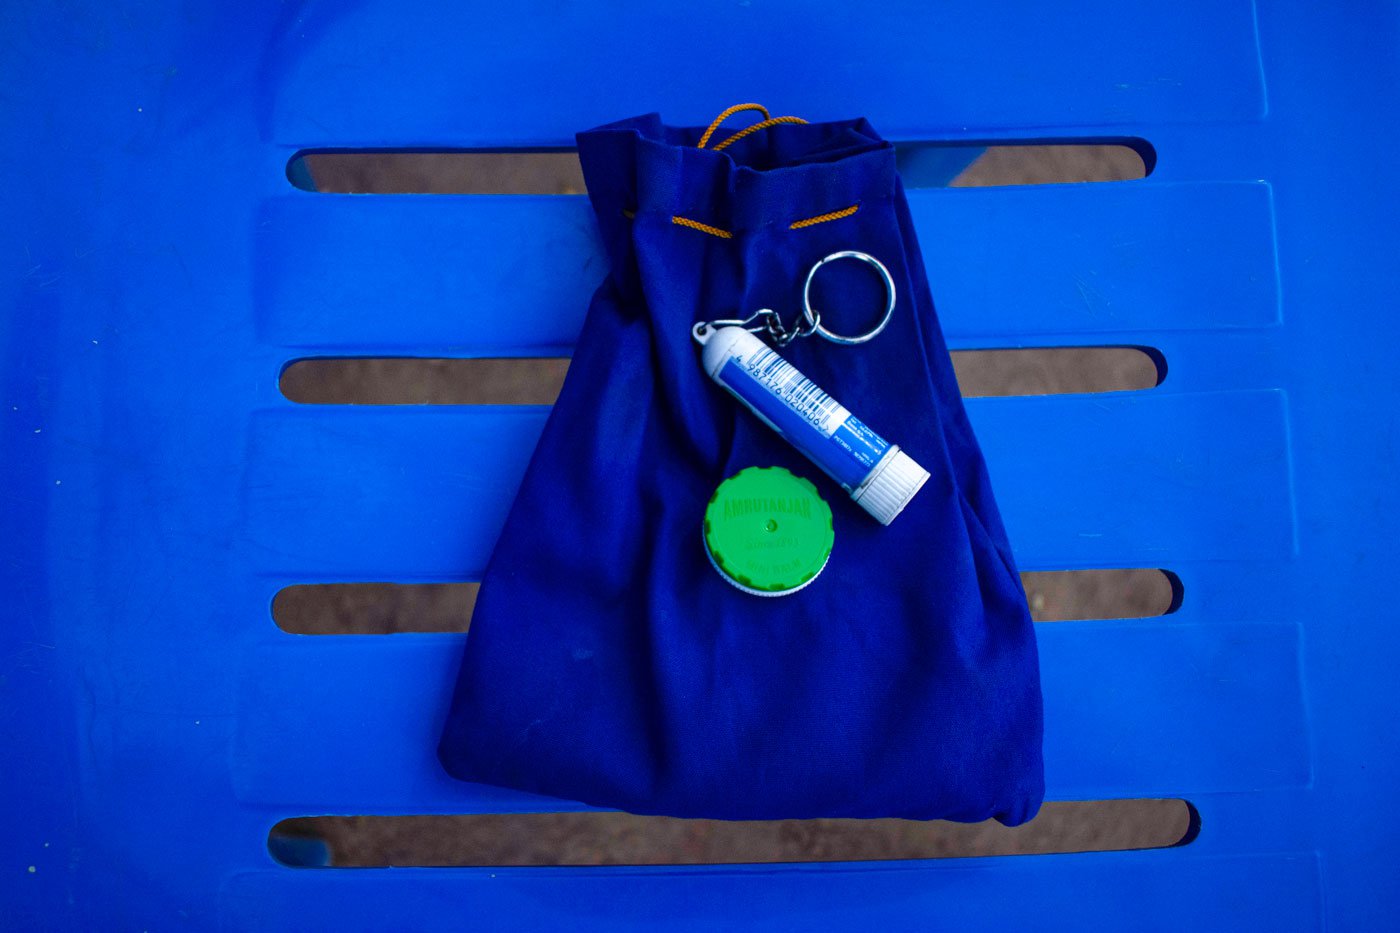 Rani’s drawstring pouch with her Amrutanjan and inhaler.